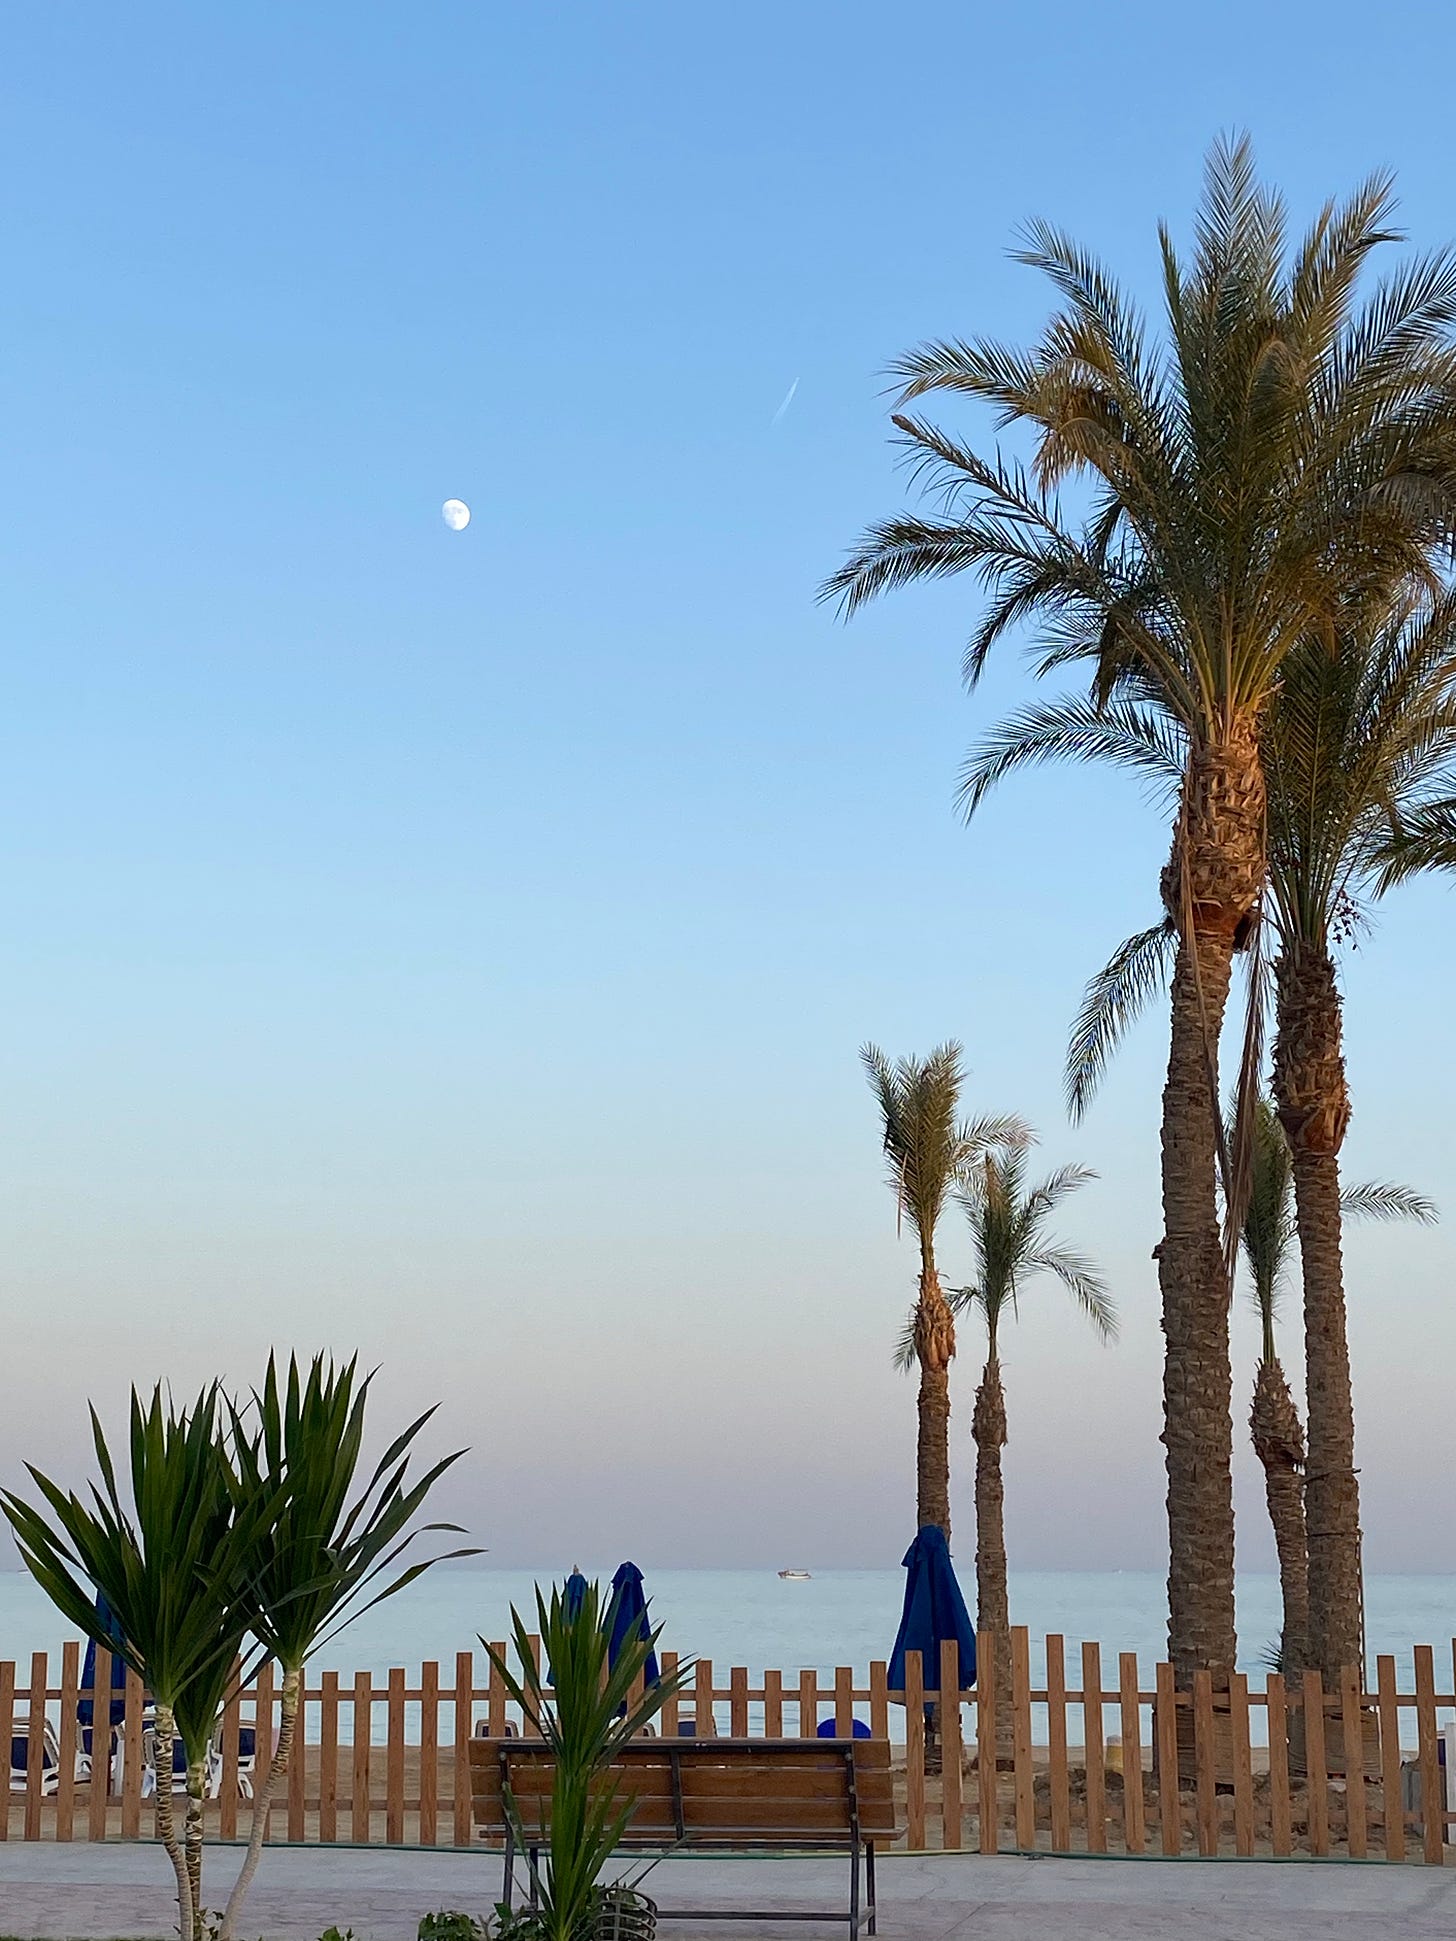 An evening scene with palm trees and the moon above the Red Sea